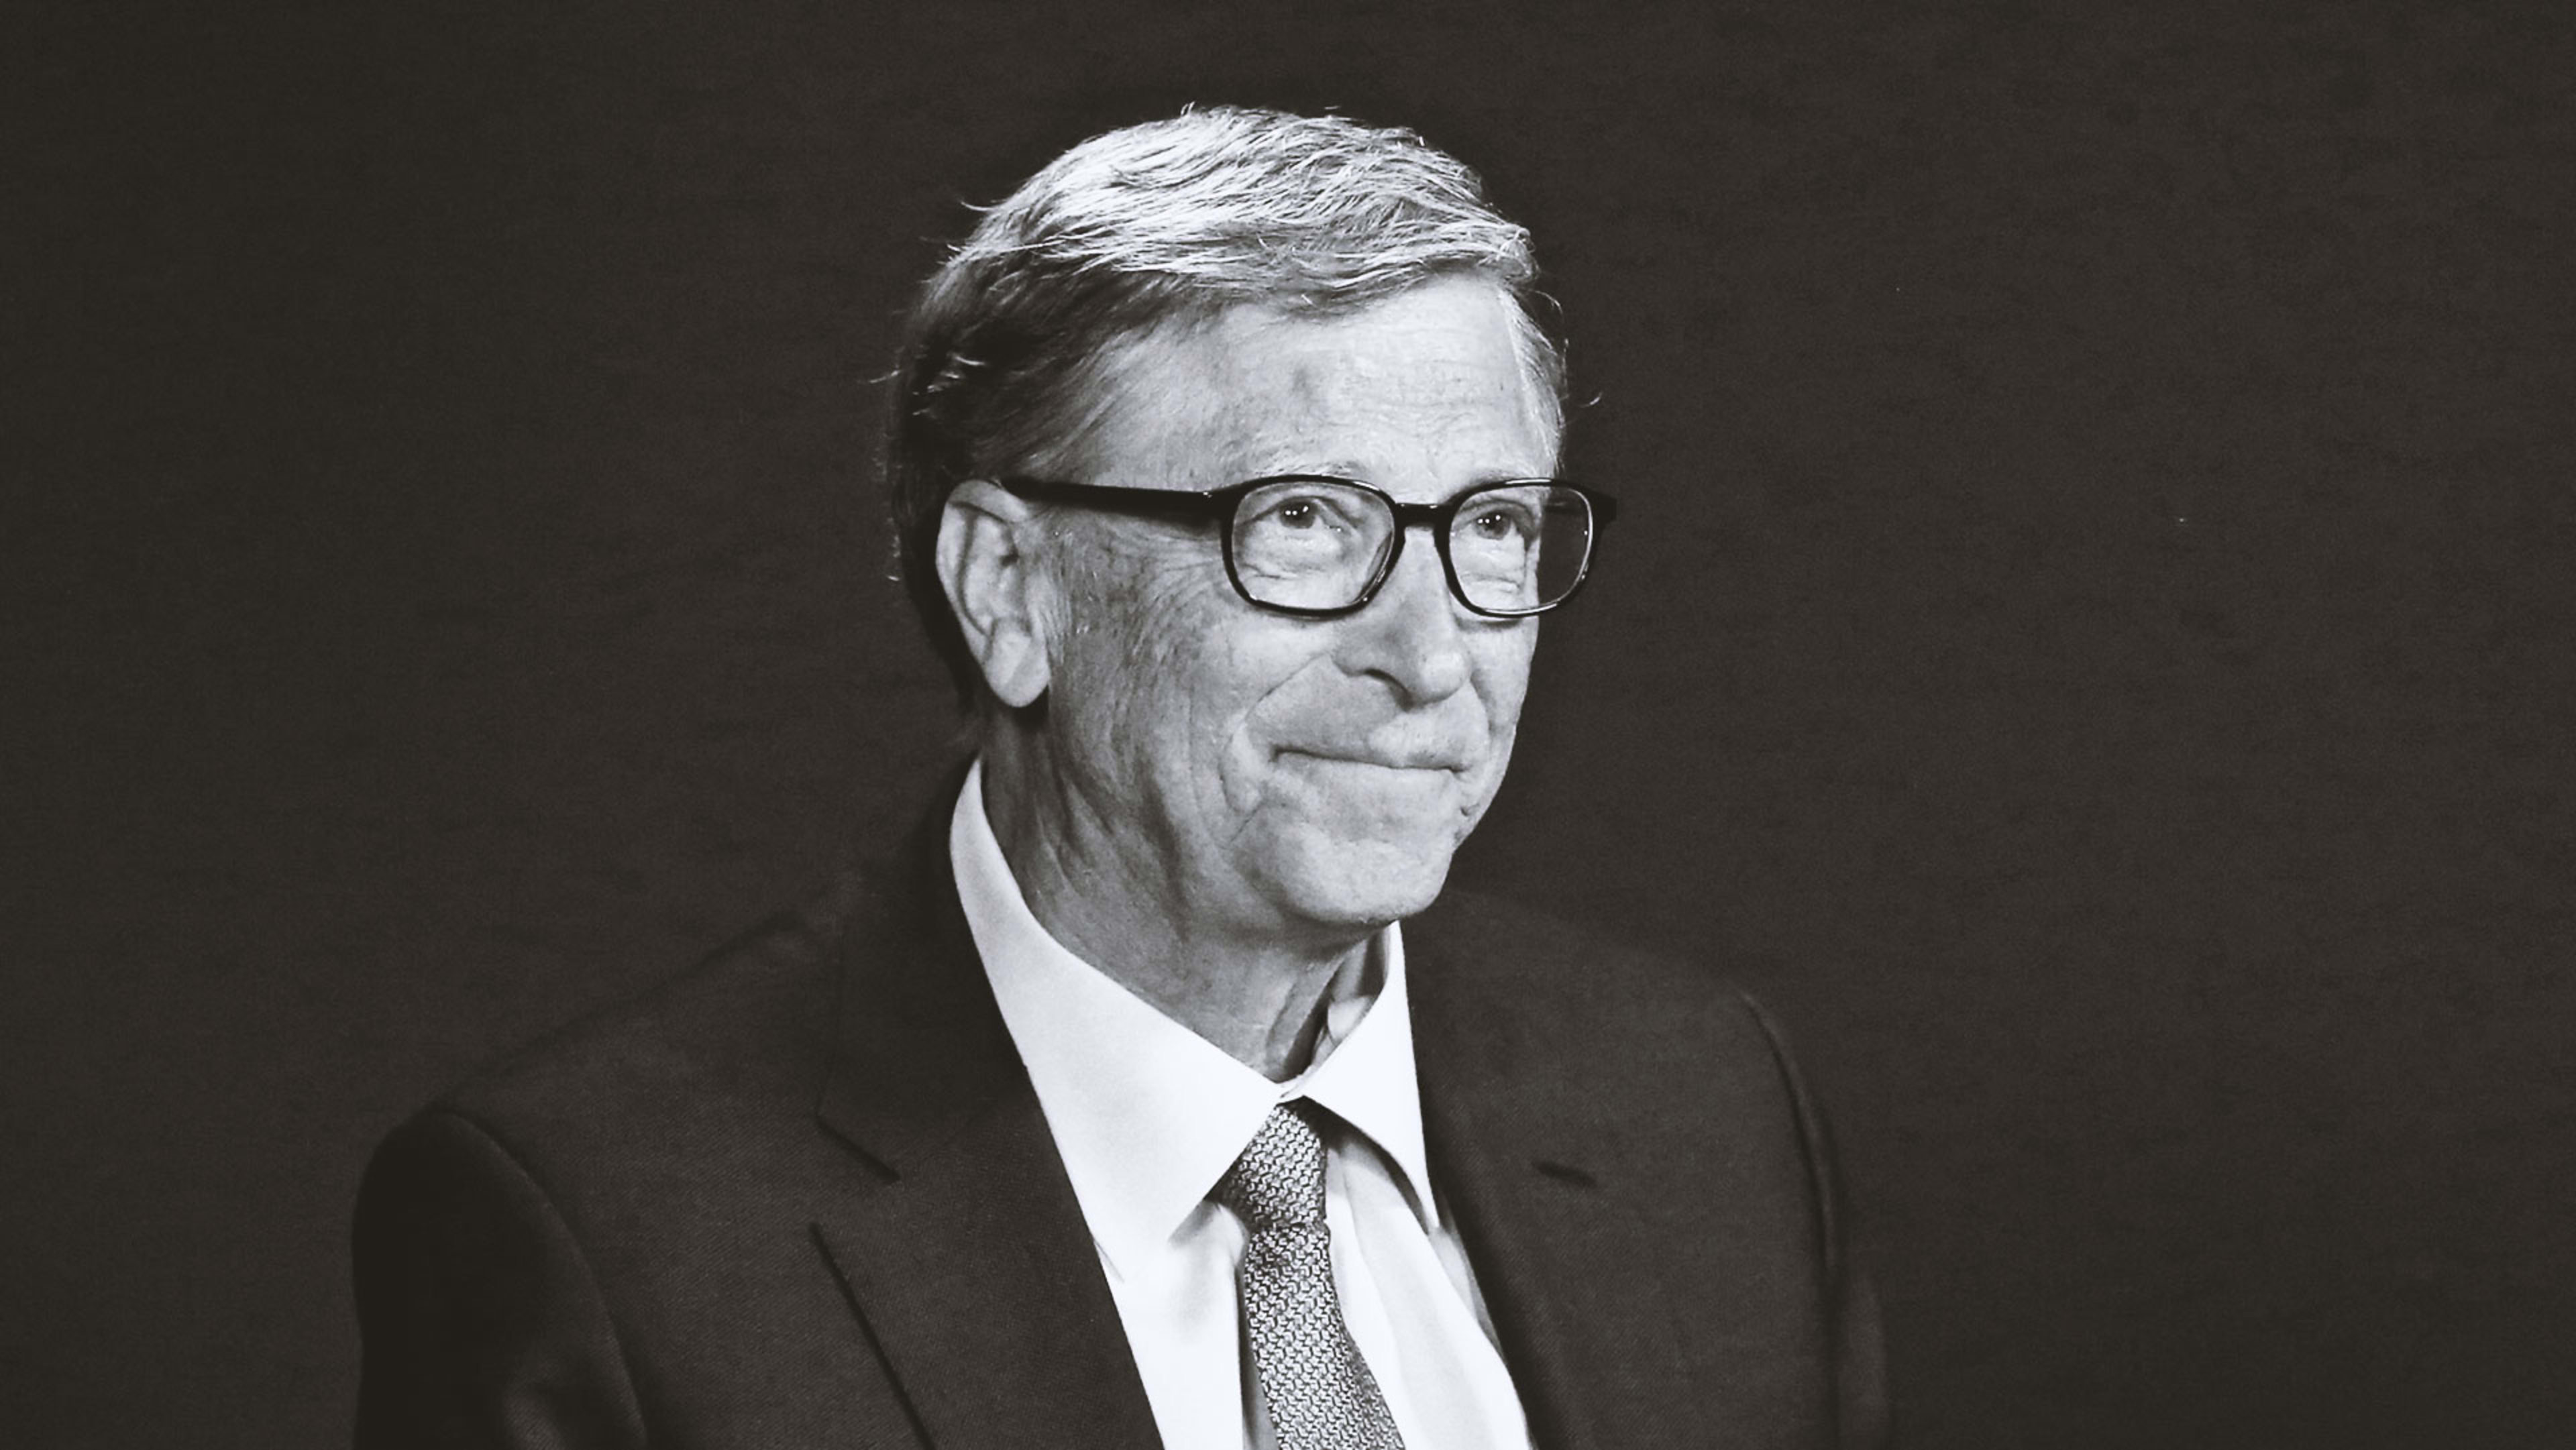 Bill Gates steps down from Microsoft’s board of directors